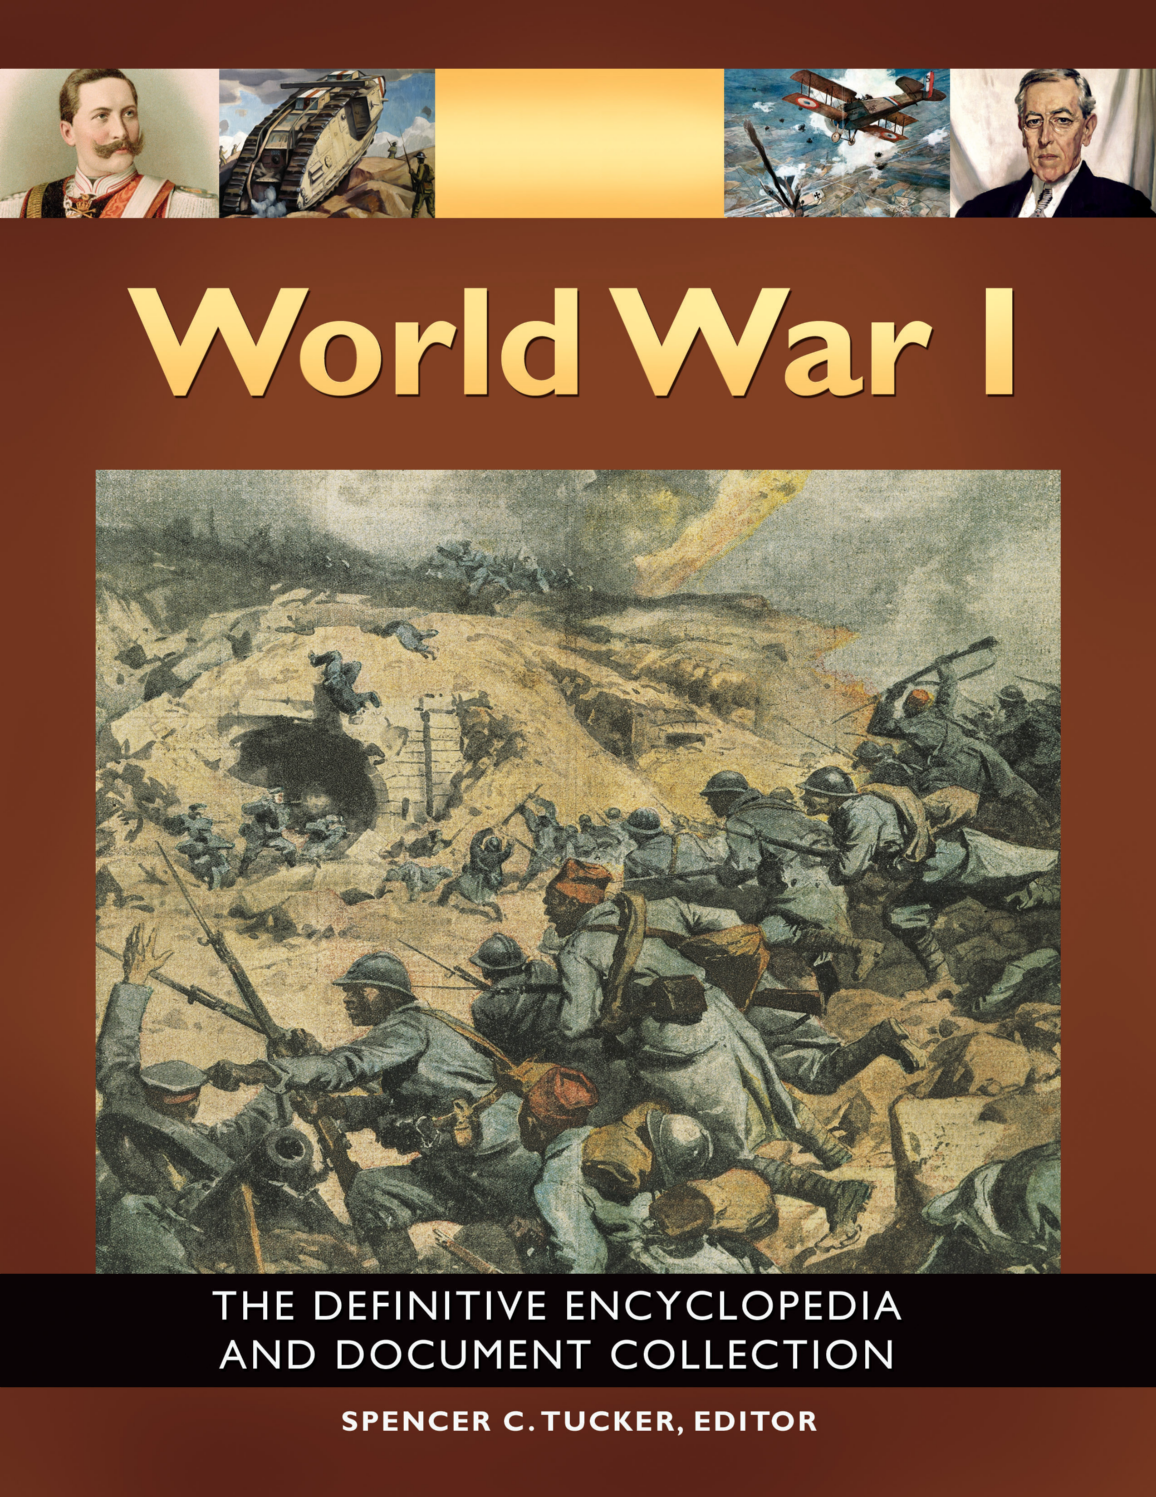 World War I: The Definitive Encyclopedia and Document Collection [5 volumes] page Cover1